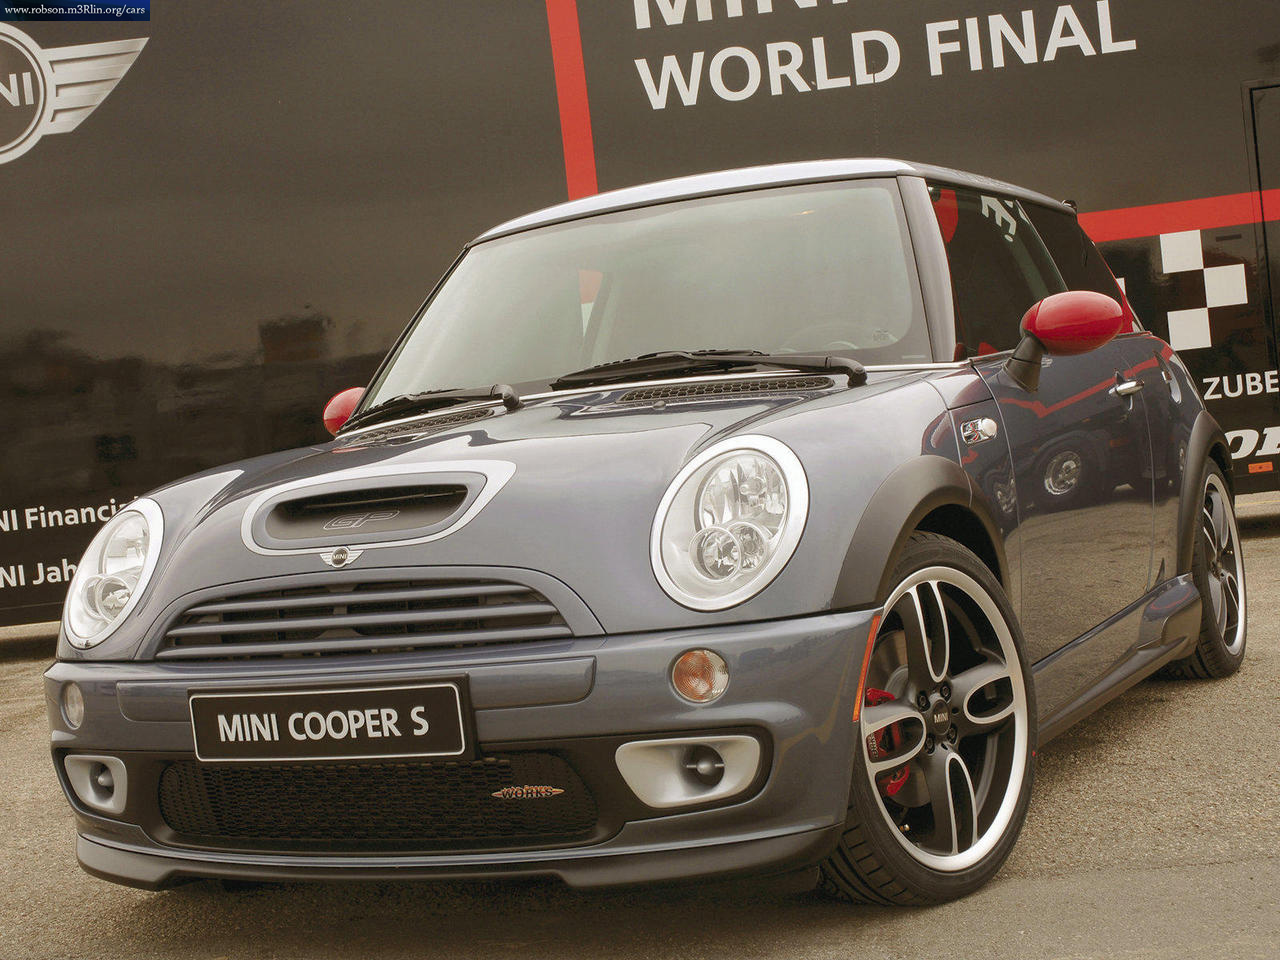 Mini Cooper S and Mini Cooper Works | Cars - Pictures & Wallpapers ...